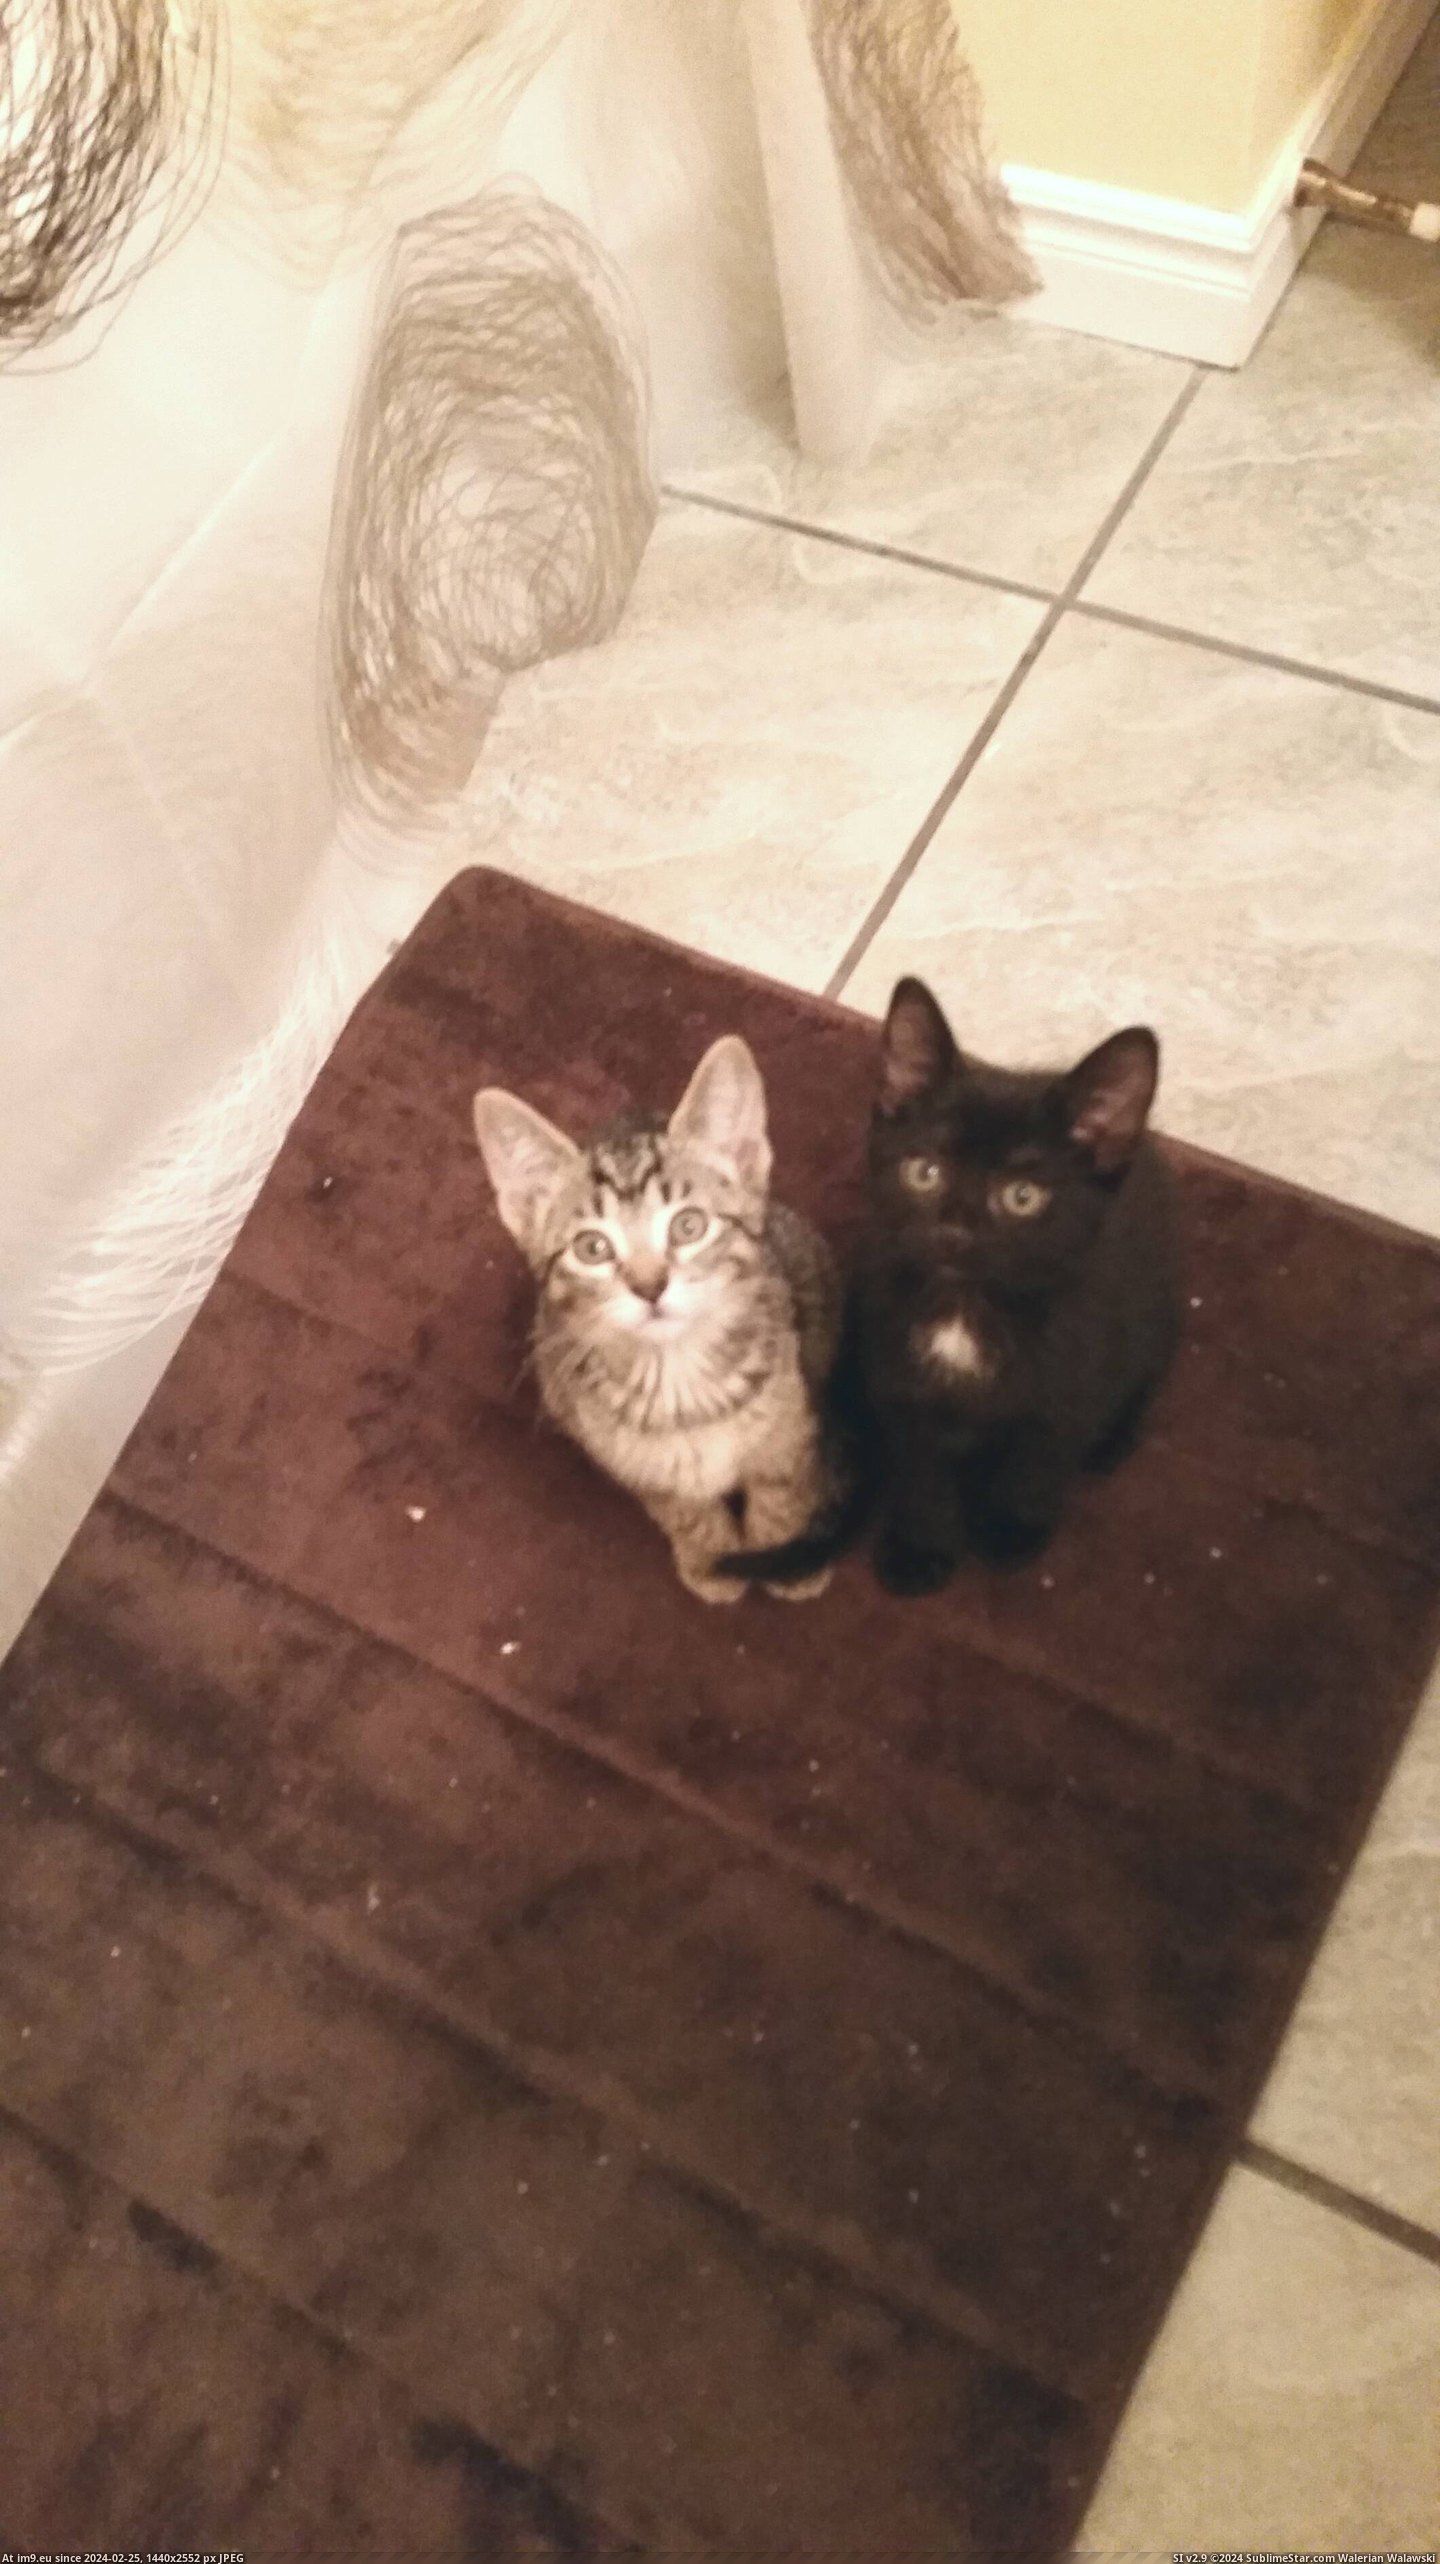 #Cats #Time #Shower #Curtain #Adopting #Pulled #Closed #Watched [Cats] First shower since adopting them yesterday. They watched me the whole time until I pulled the shower curtain closed.. the Pic. (Obraz z album My r/CATS favs))